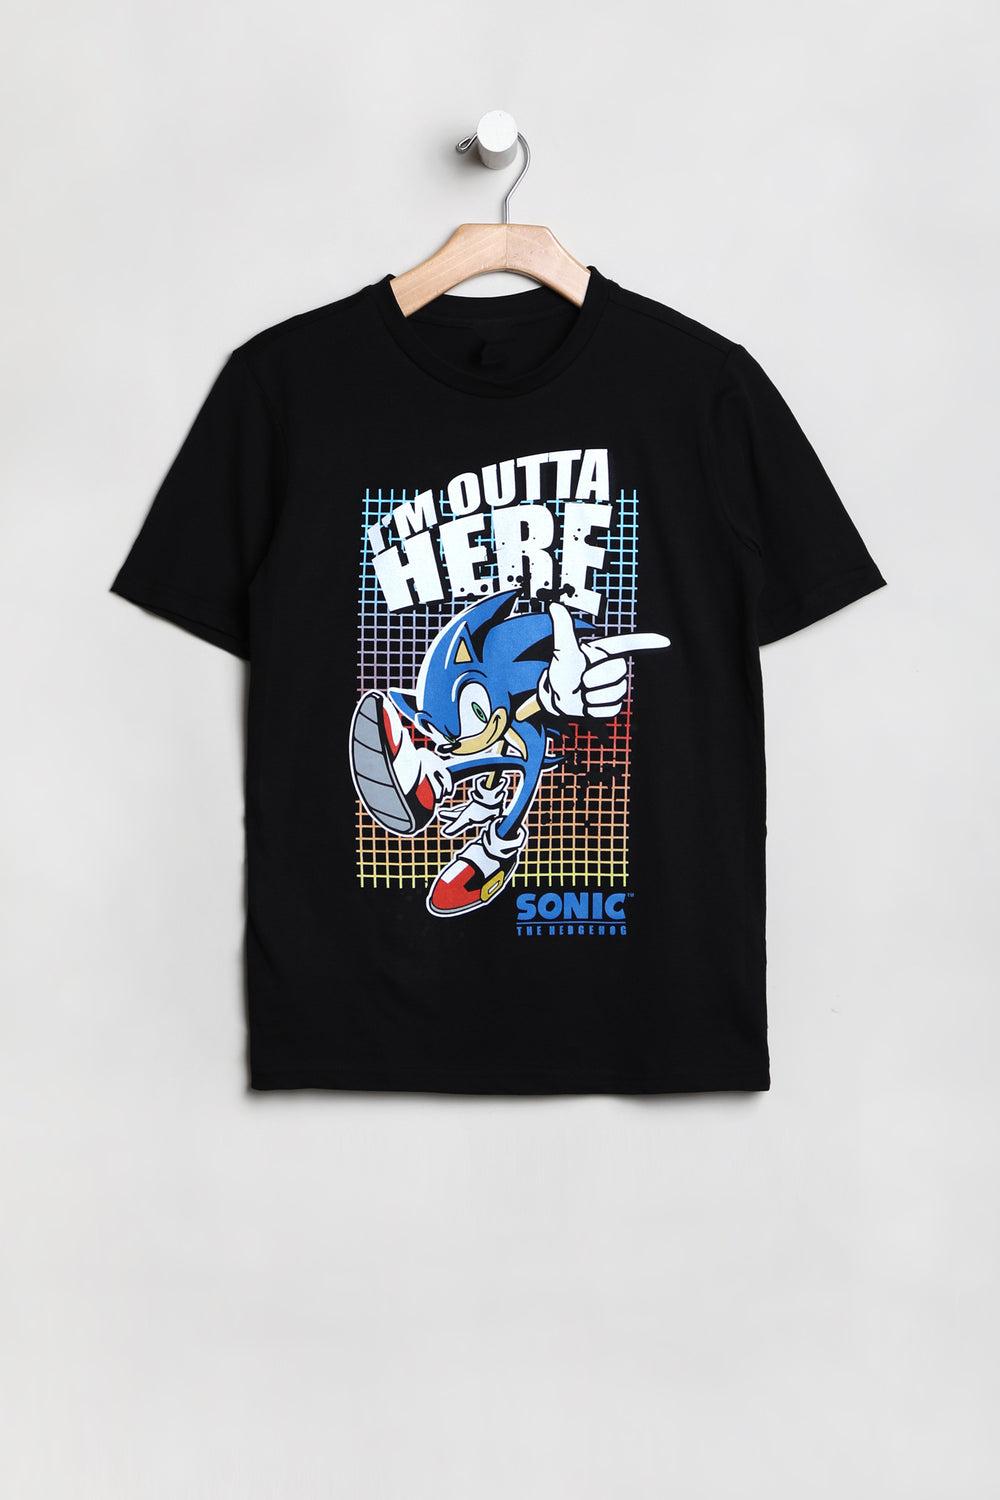 Youth Sonic the Hedgehog T-Shirt Youth Sonic the Hedgehog T-Shirt